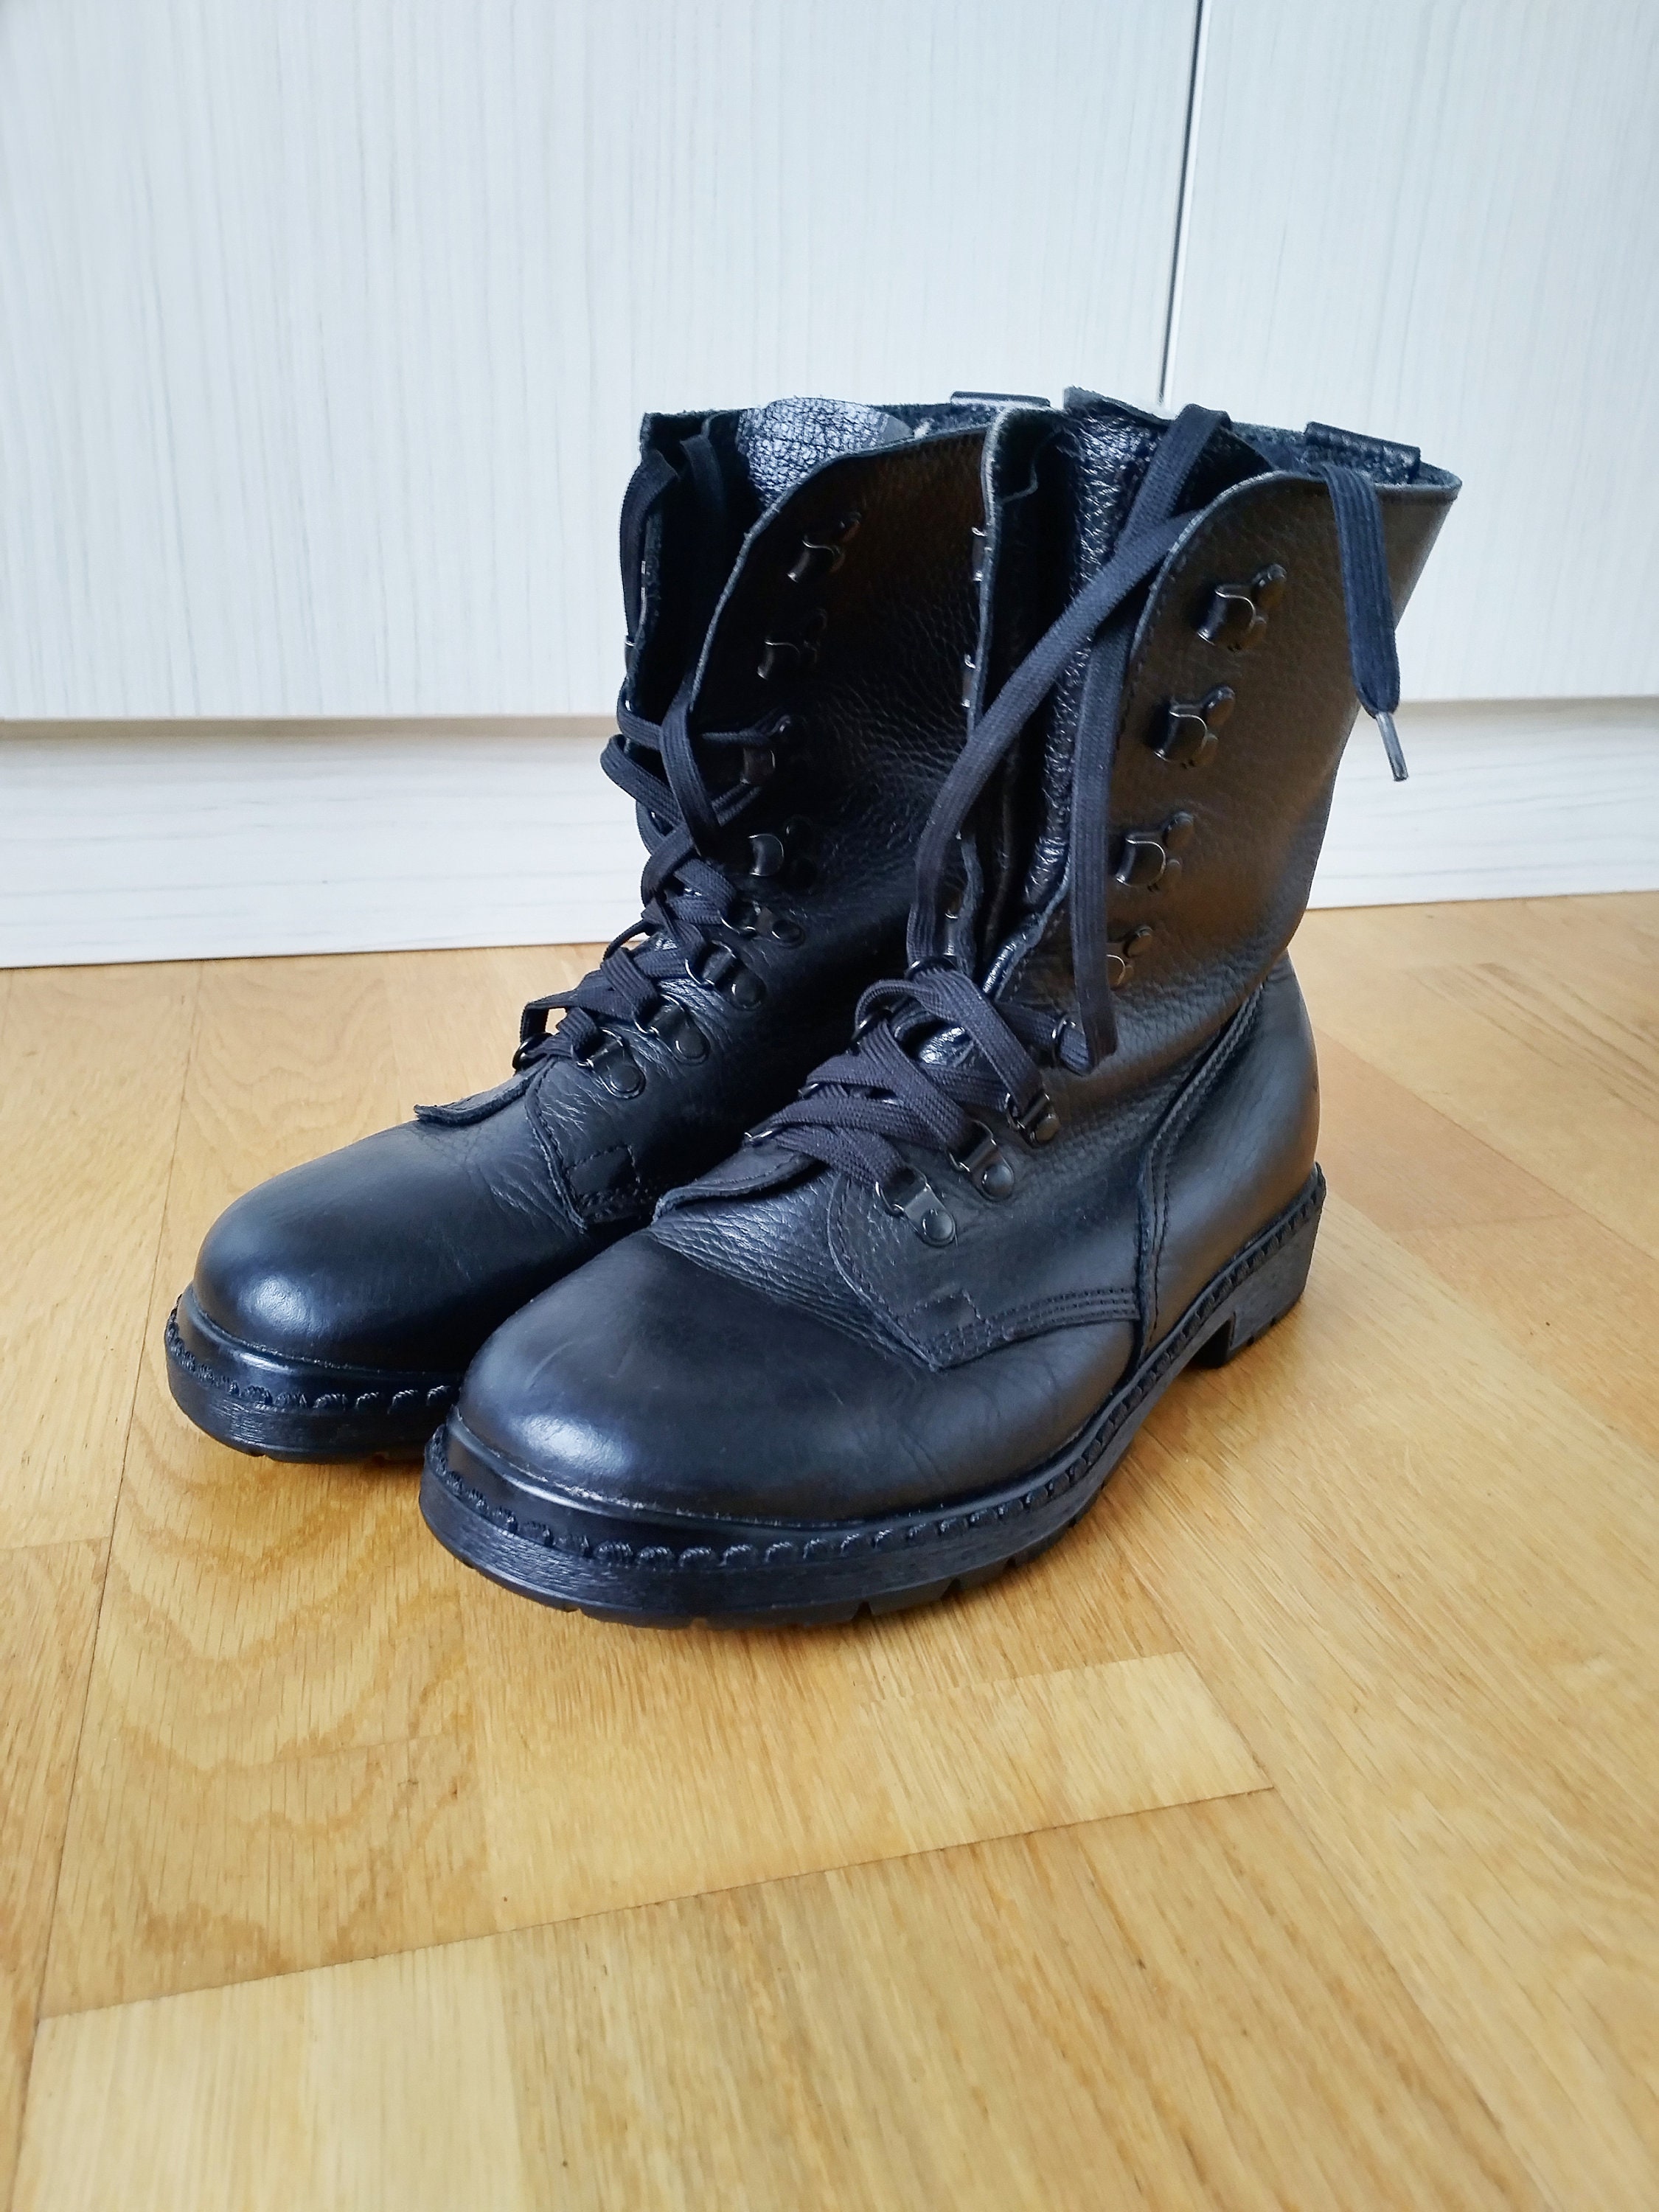 Antistatisch Boots Leather - Vintage OEL Combat Etsy U. Small Size,oel-u Military BENZINFEST Boots, Boots